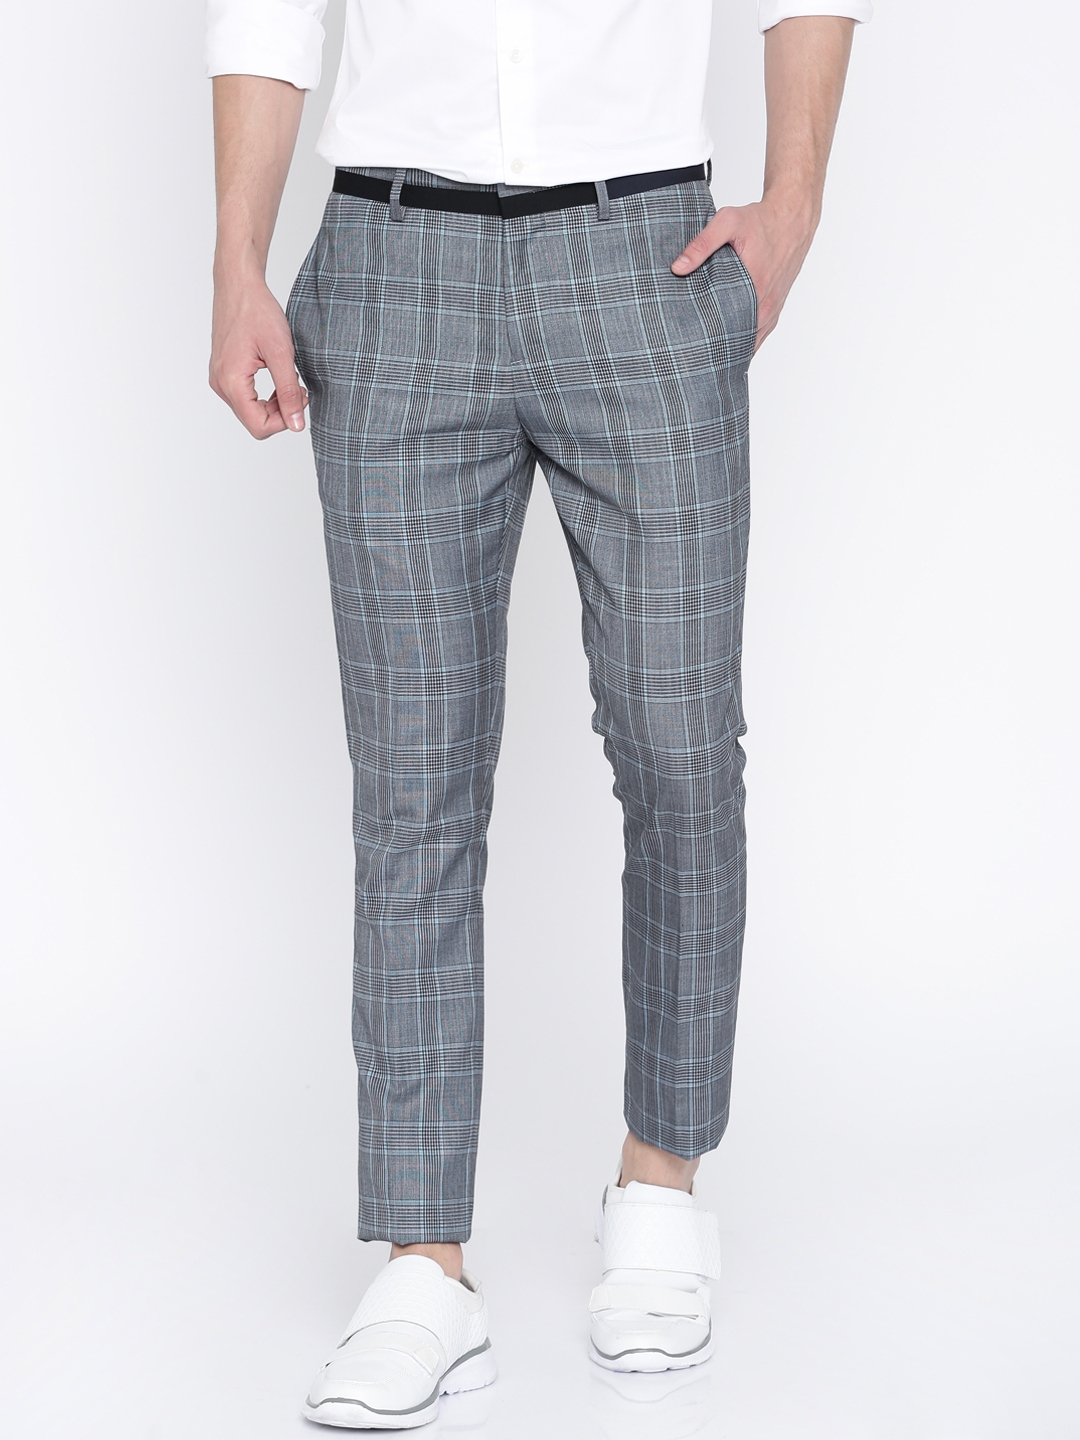 Buy INVICTUS Men Blue  Grey Slim Fit Checked Cigarette Trousers  Trousers  for Men 2029961  Myntra